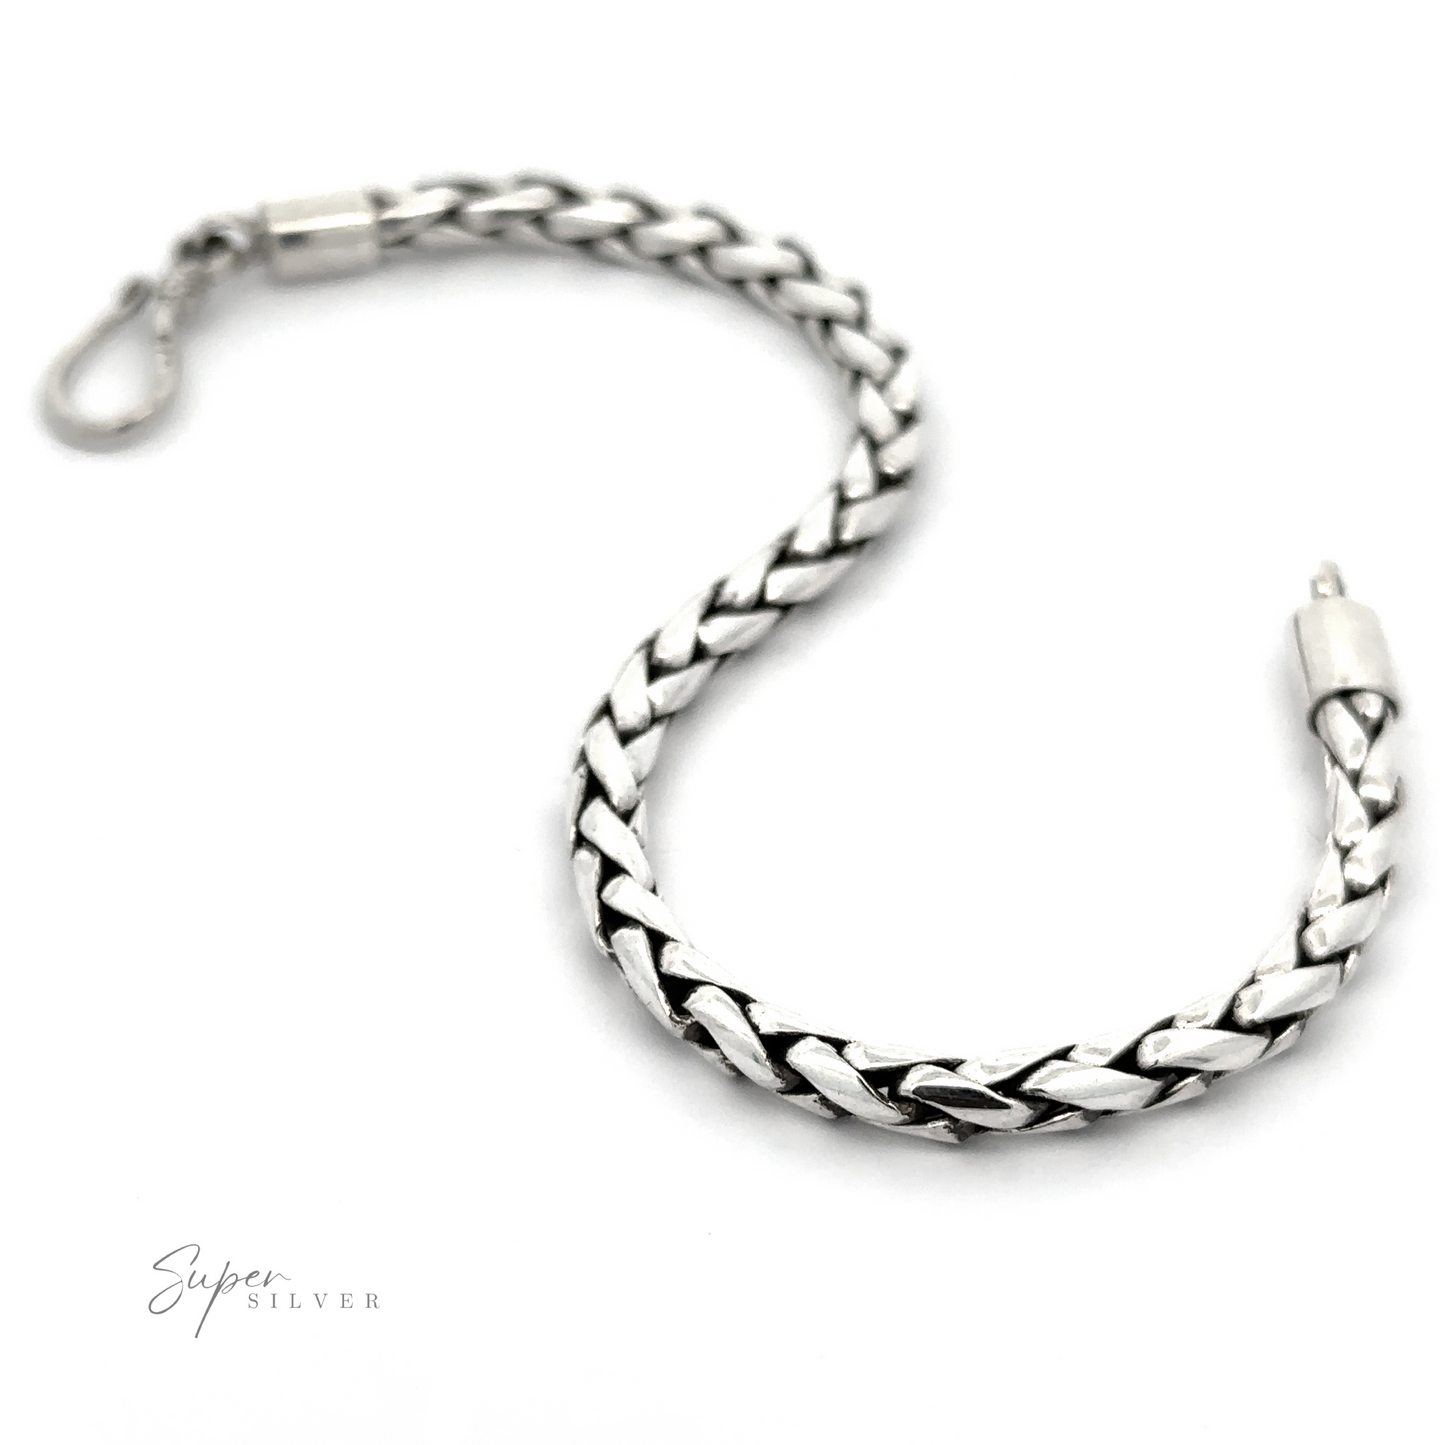 
                  
                    A stylish bracelet, this 4mm Bright Rope Bracelet with a lobster clasp lies gracefully on a white background. Crafted from .925 Sterling Silver, the logo "Super Silver" is visible at the bottom left corner.
                  
                